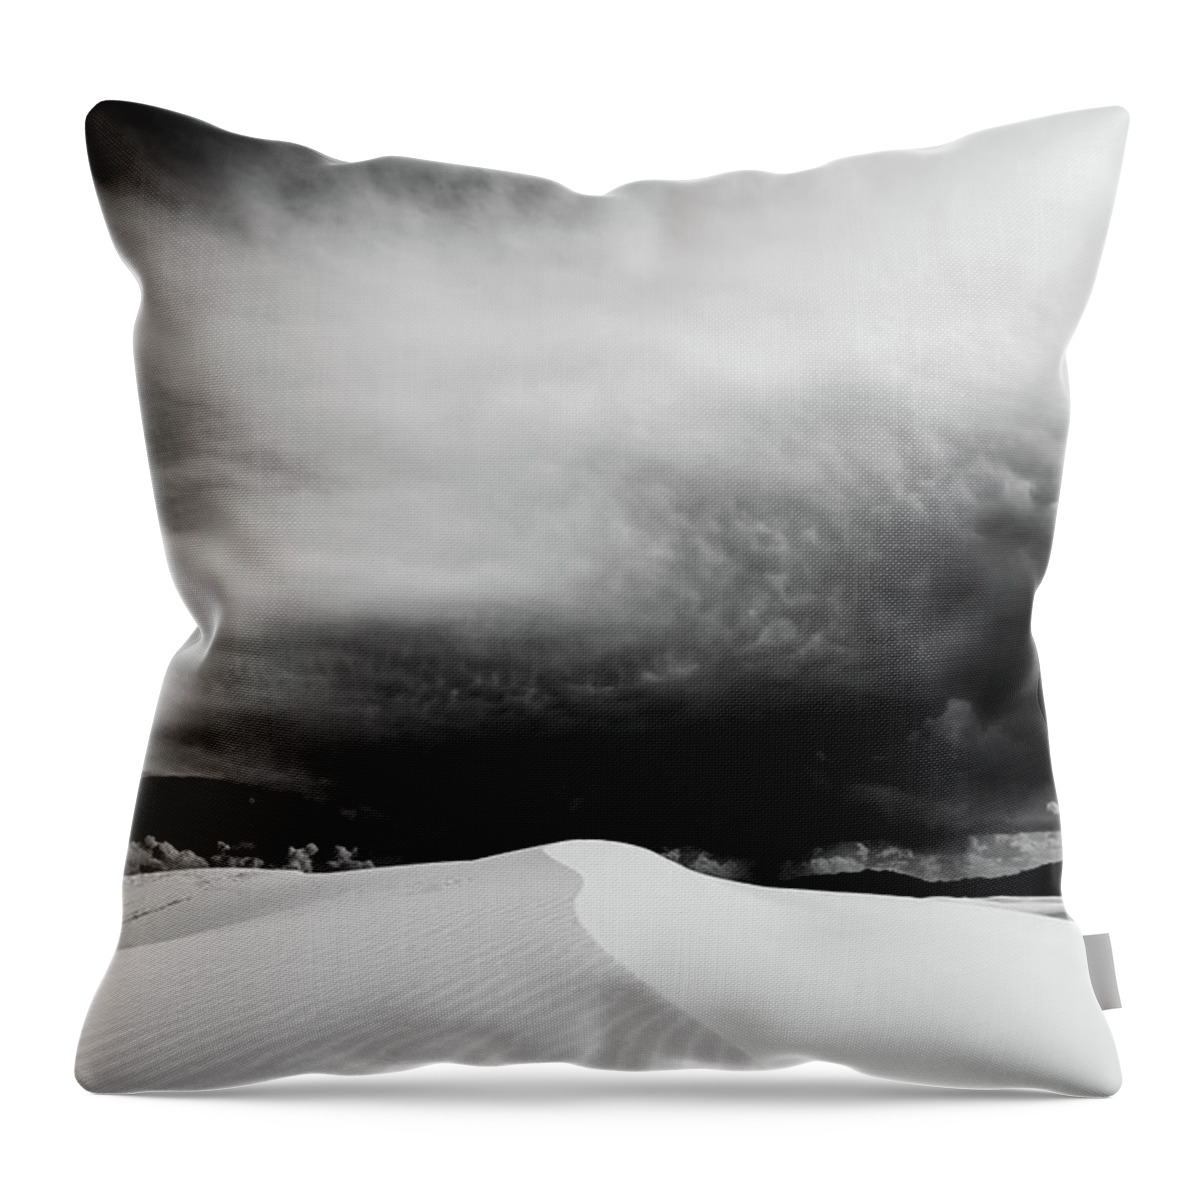 White Sands National Monument Throw Pillow featuring the photograph Desert Storm by Nando Lardi